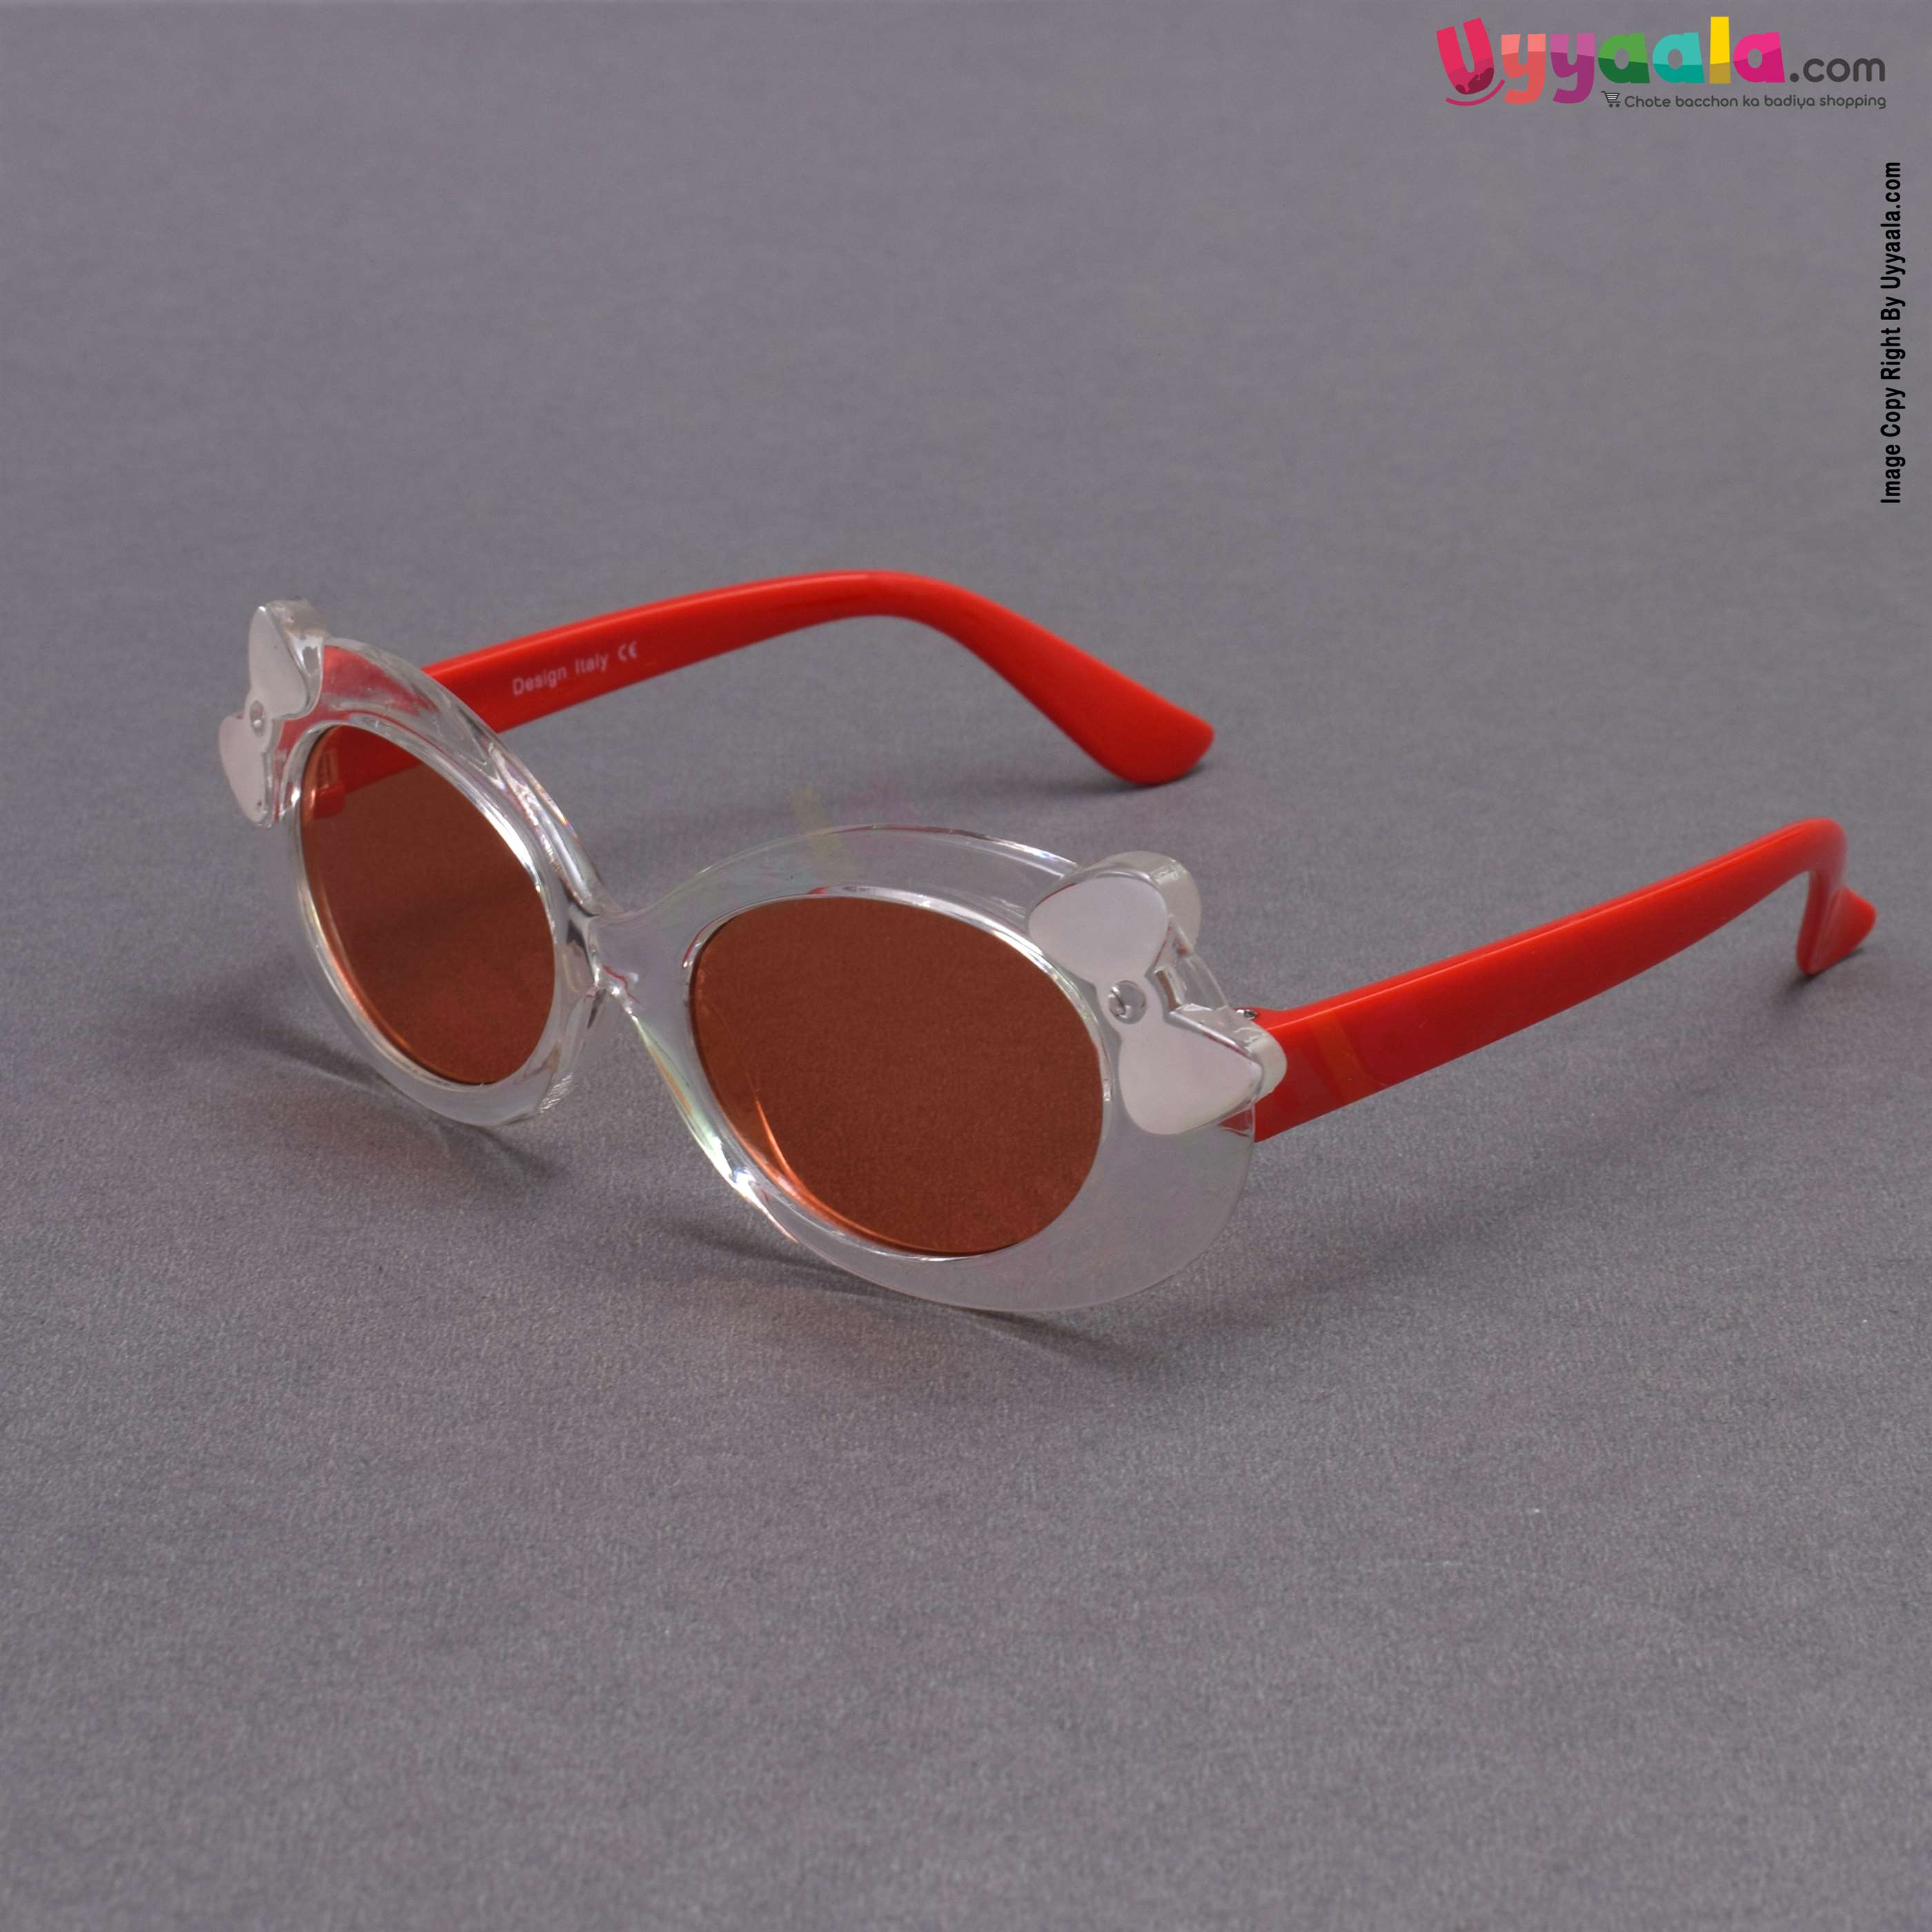 Stylish cat-eye red shade sunglasses for kids - red